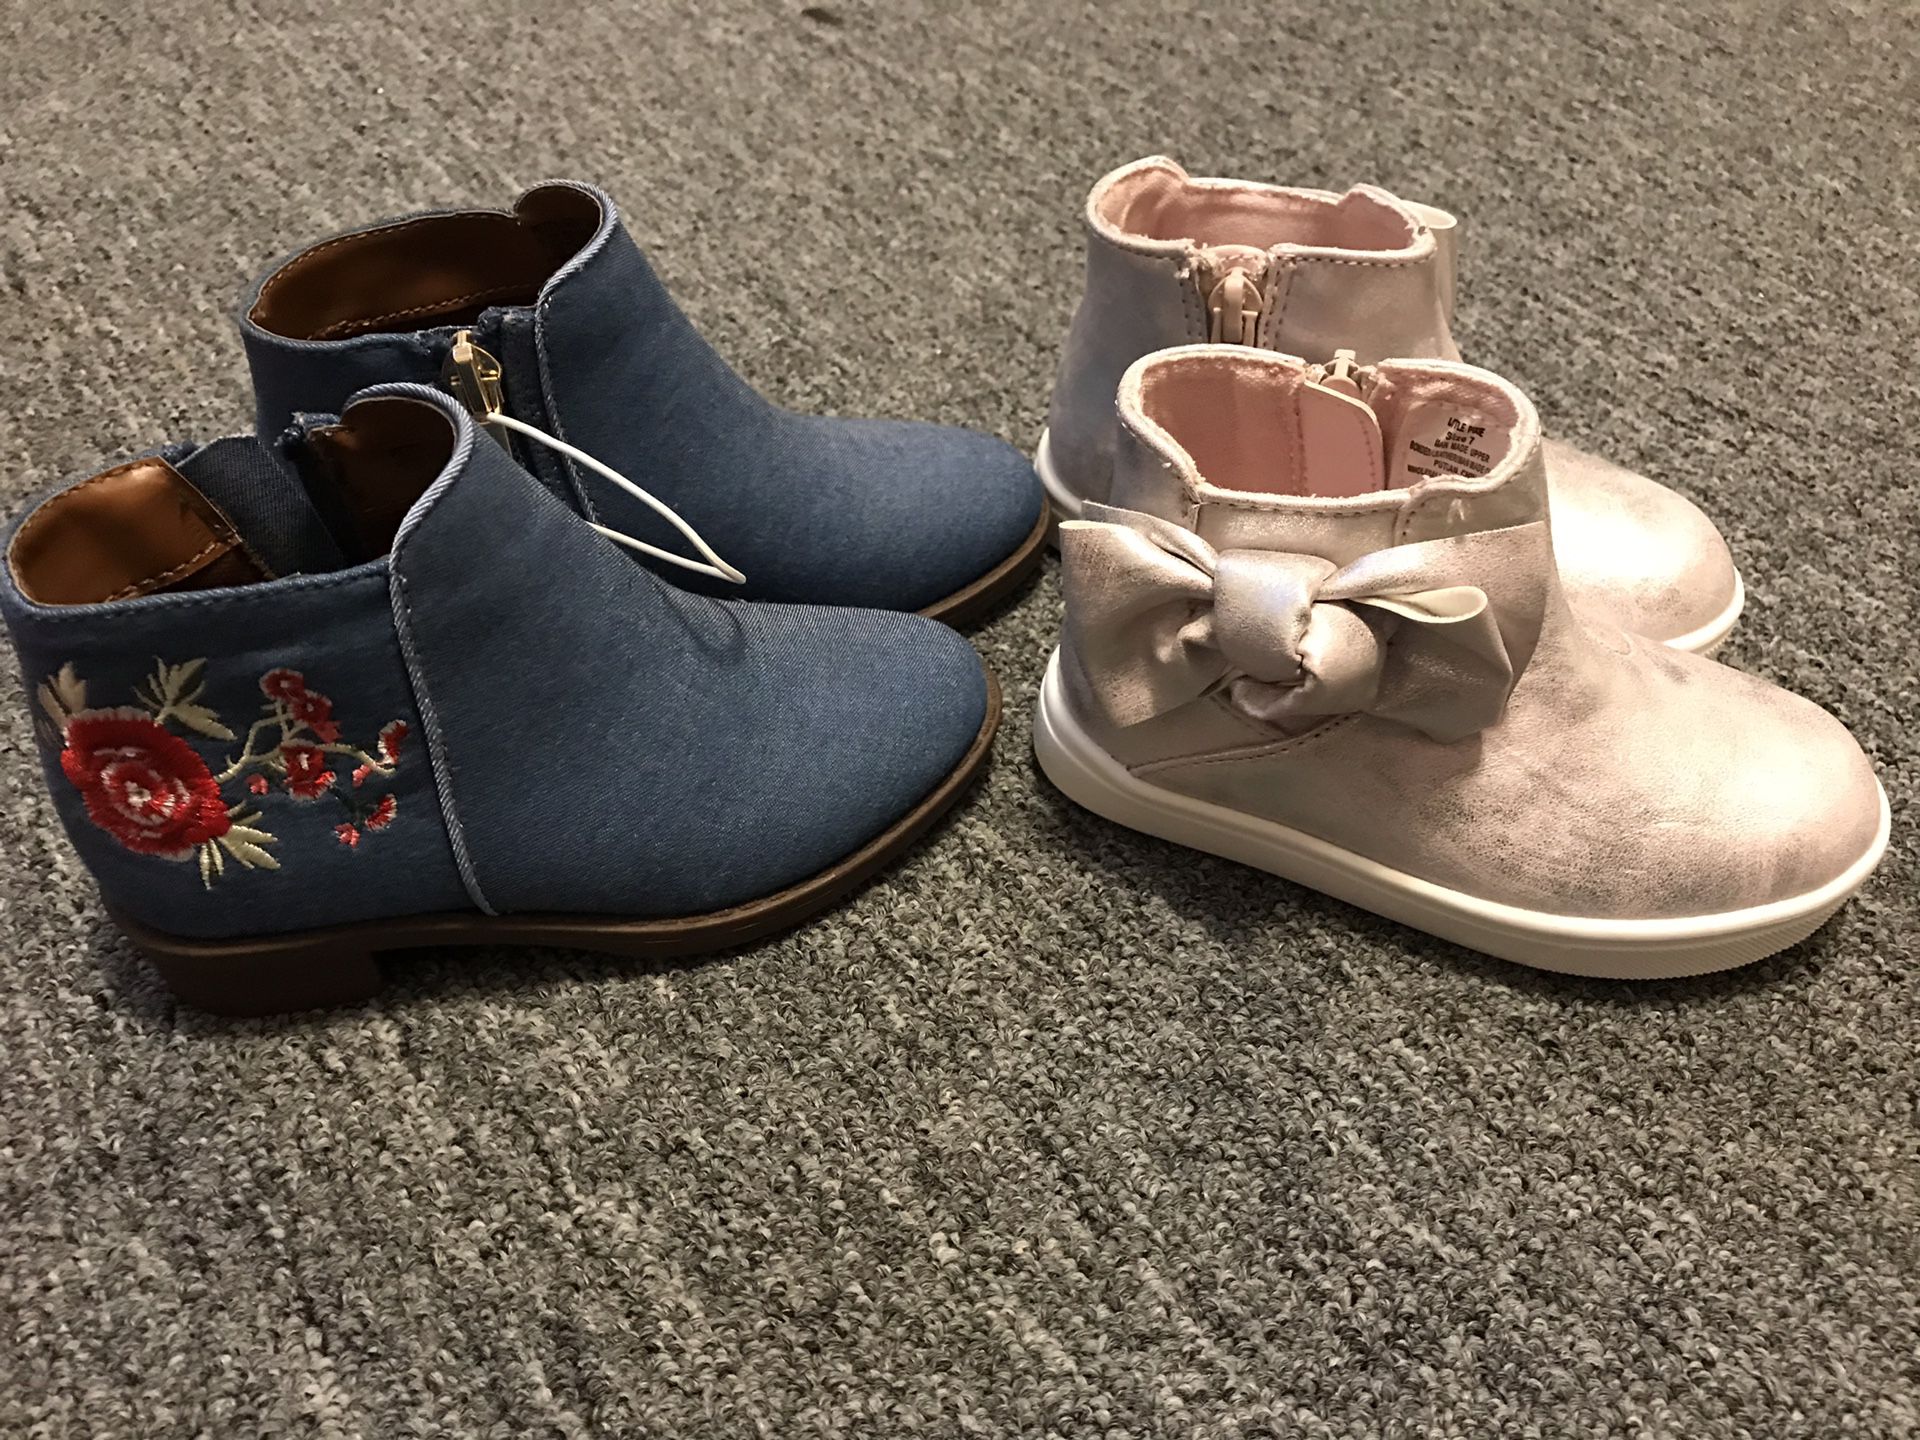 New baby girl size 7c boots